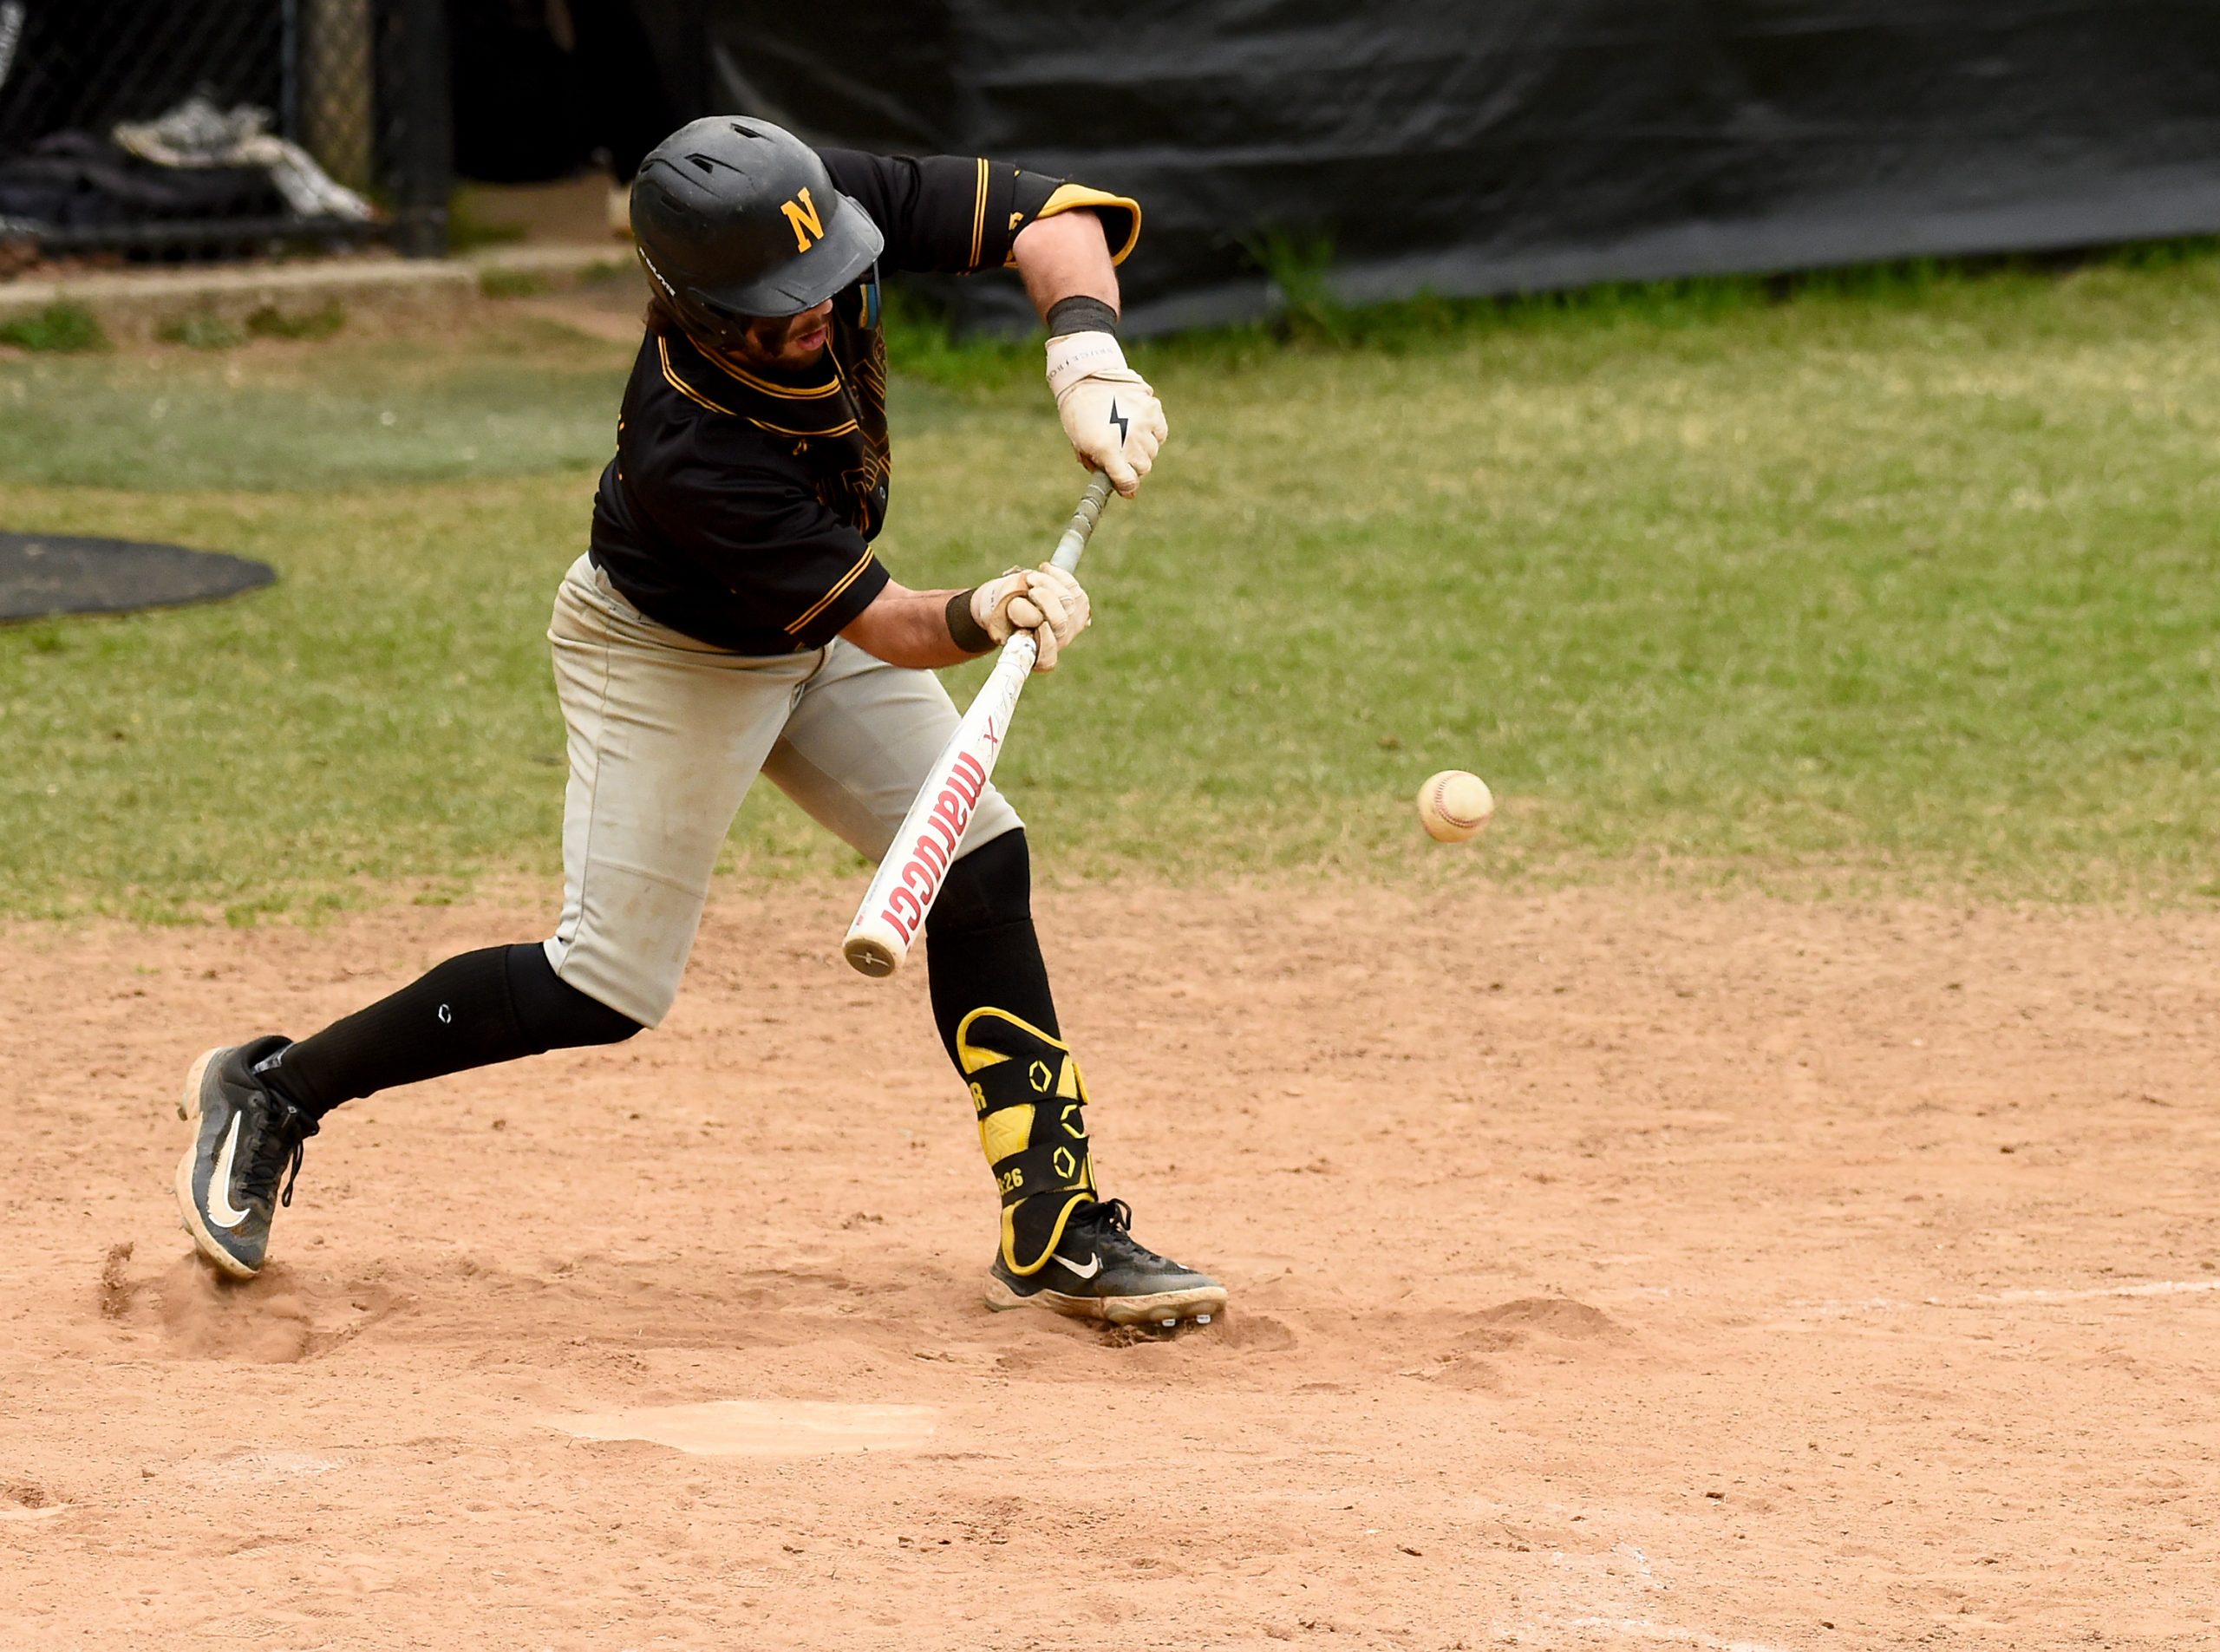 Northeast’s Mike Kooser lays down a sacrifice bunt to advance...